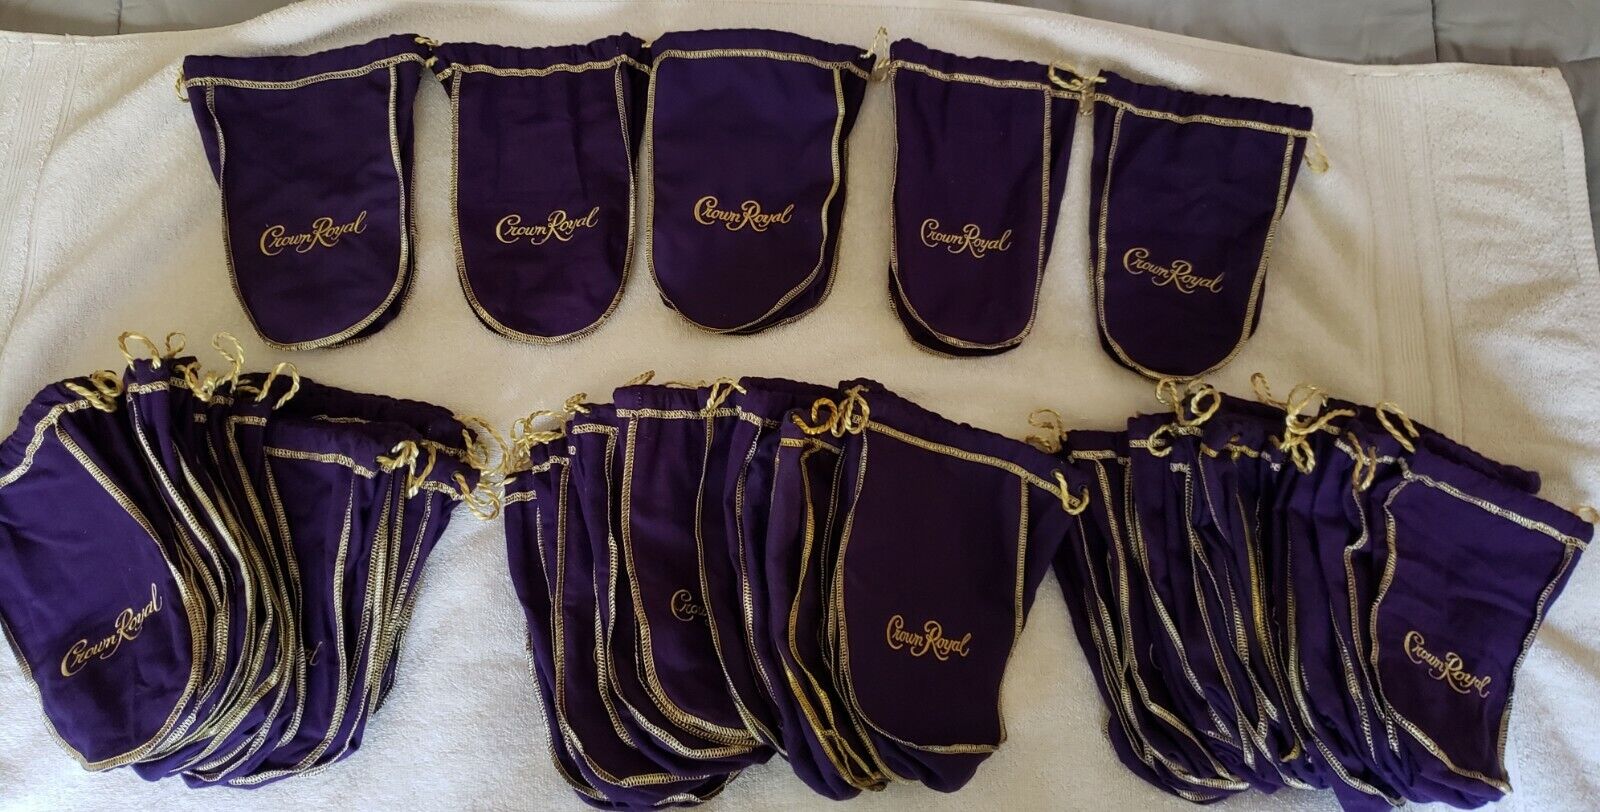 Crown Royal Purple Velvet Bags 53 Count - Many Uses - Great Condition!